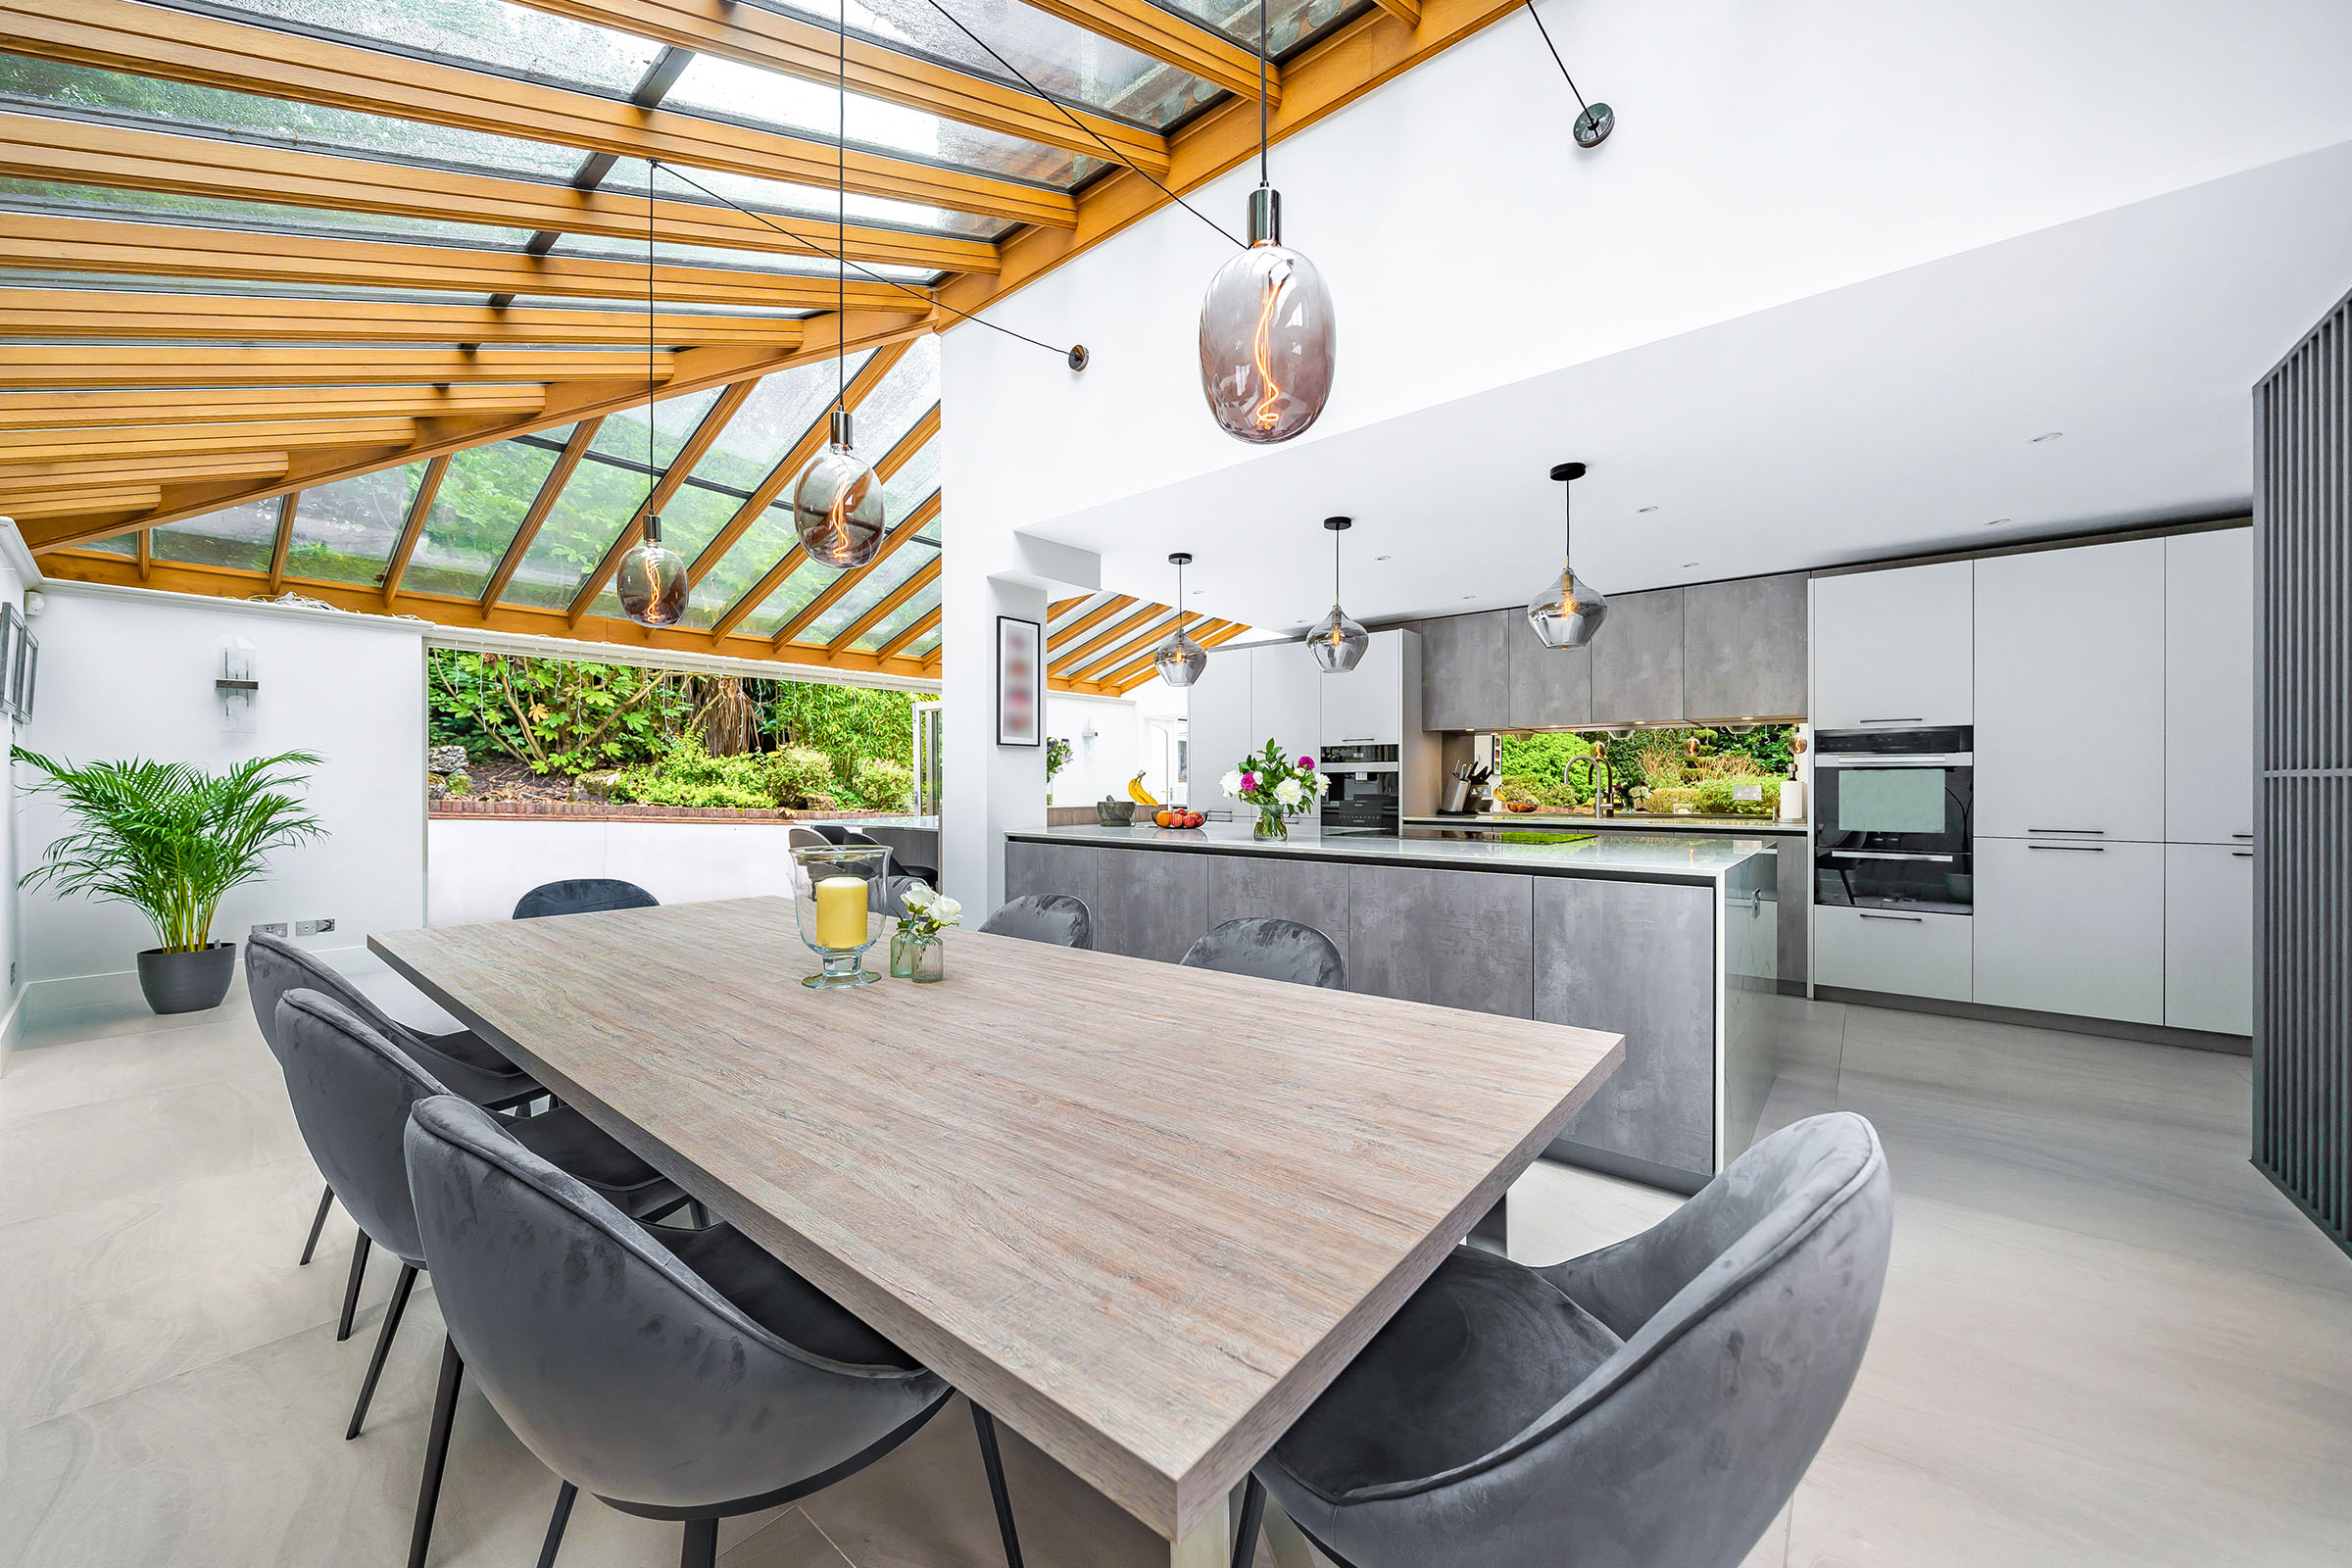 large modern grey and white kitchen extension with glass roof and wooden beams